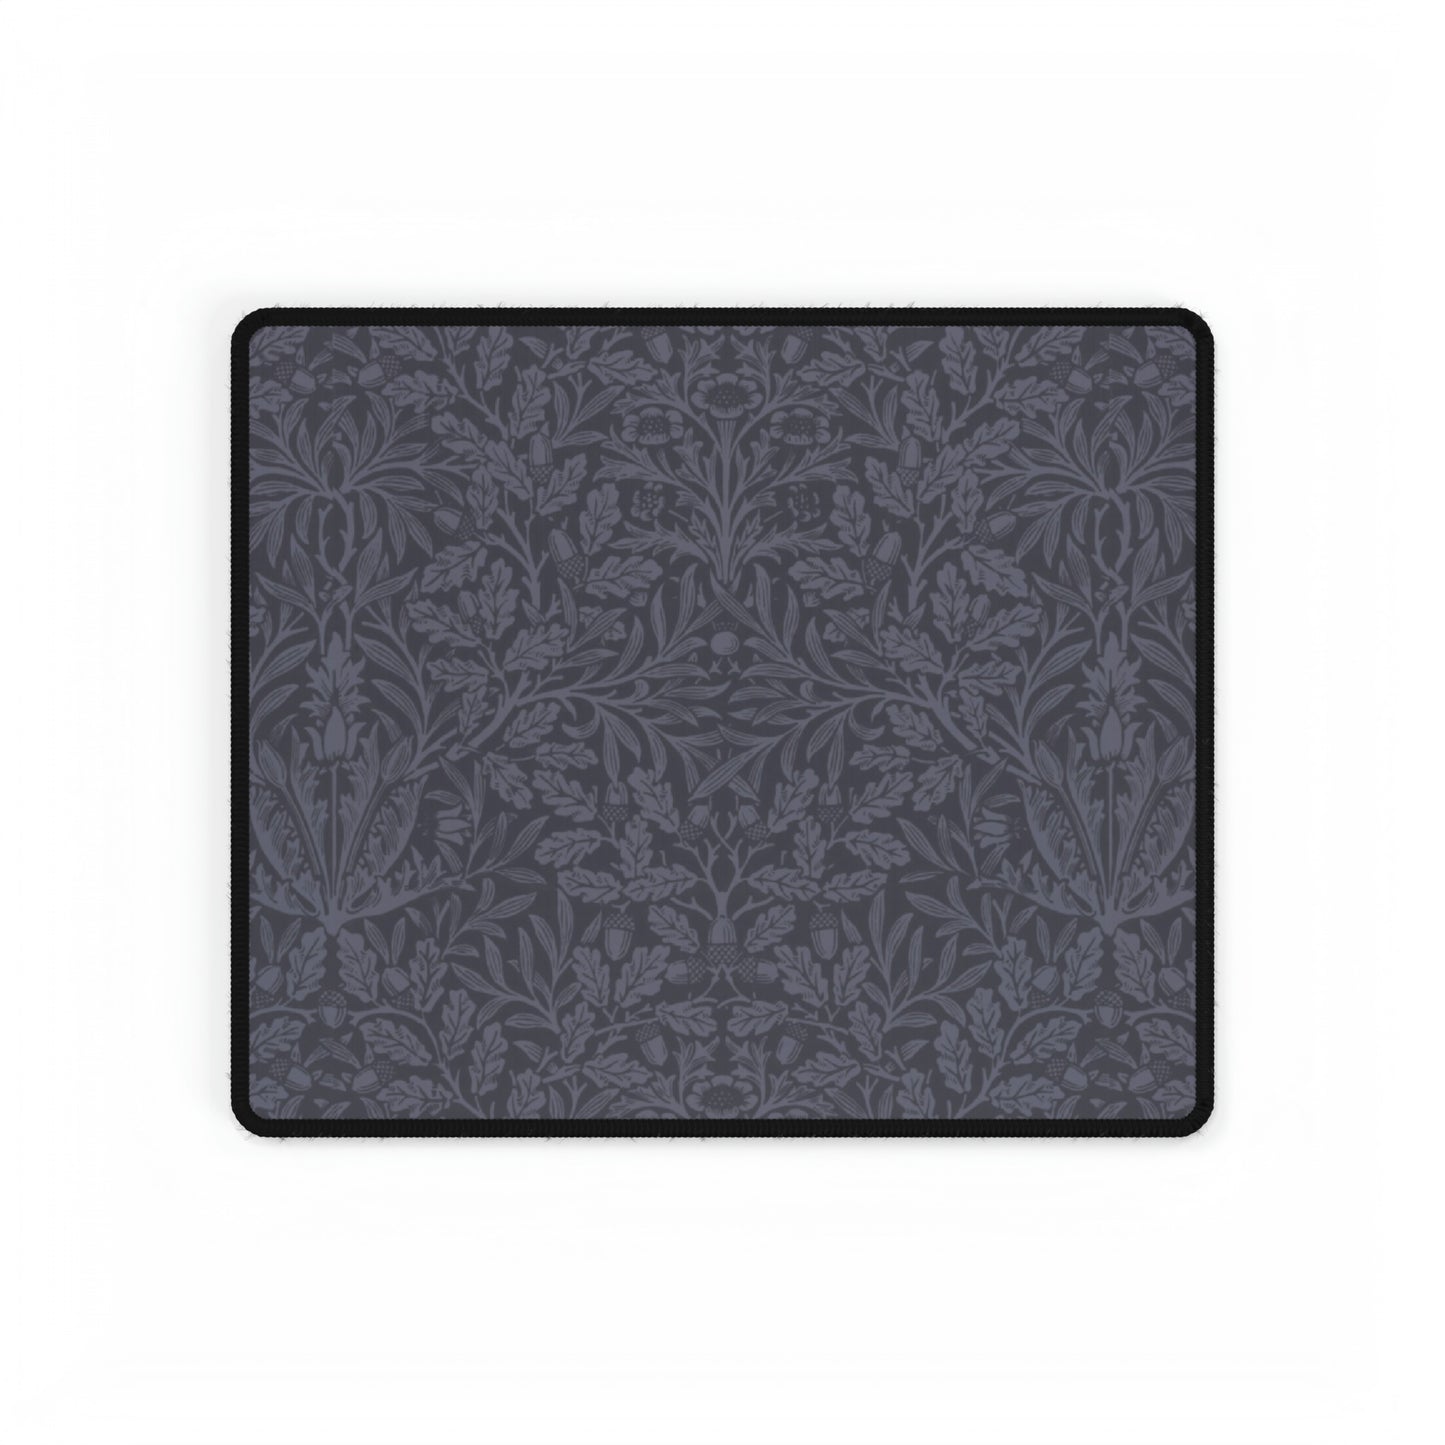 william-morris-co-desk-mats-acorns-and-oak-leaves-collection-smokey-blue-8